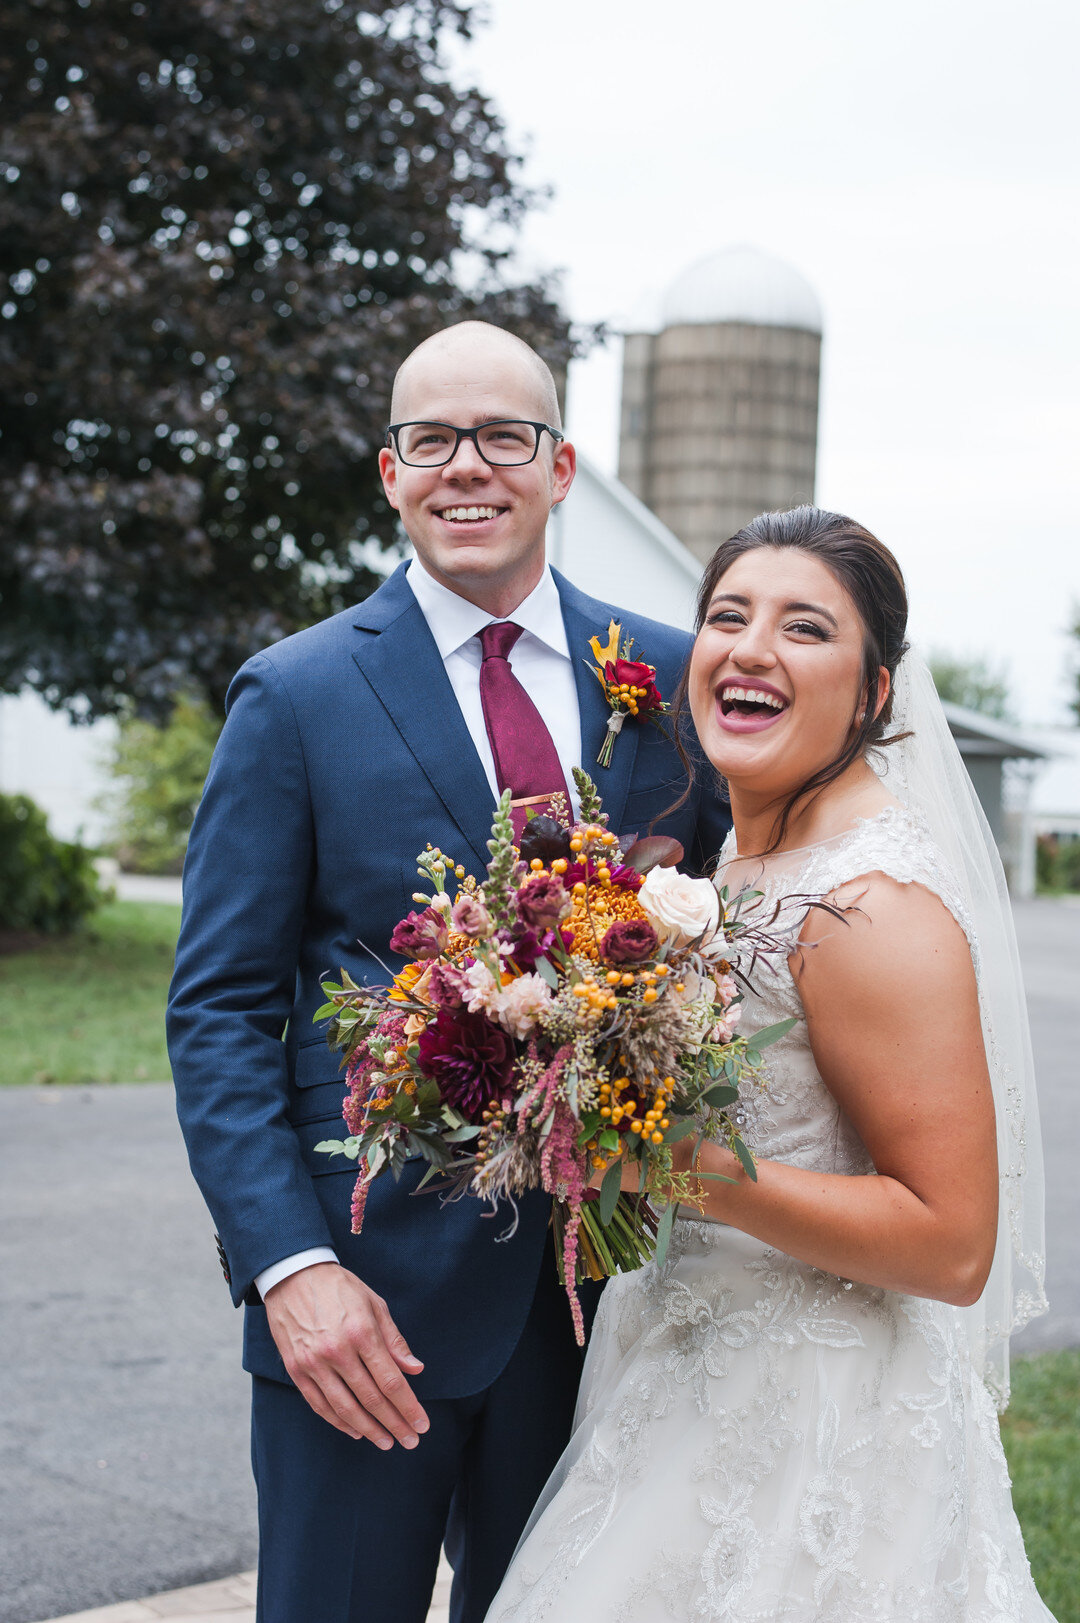 Fall Heritage Prairie Farm Wedding captured by Elite Photo featured on CHI thee WED